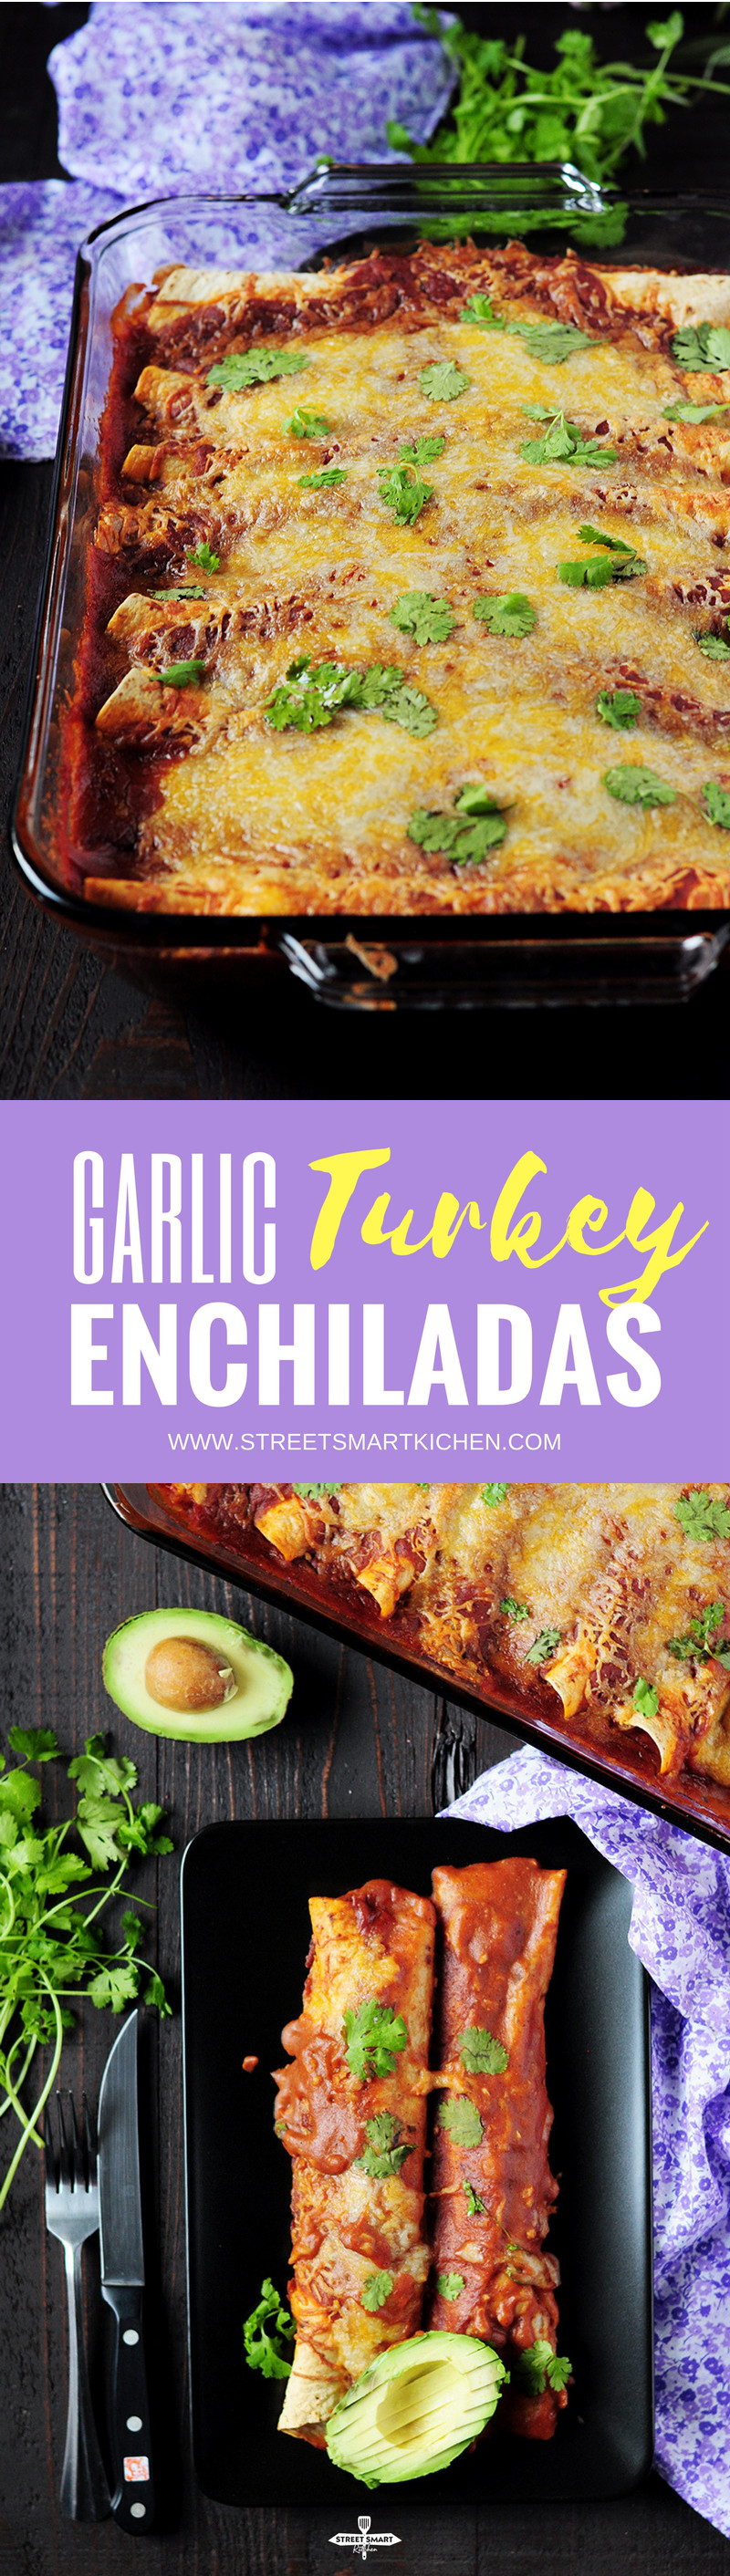 Looking for a street-smart way to use up leftover turkey or an exciting dish to spice up a weeknight? These healthy turkey enchiladas fit the bill just fine.